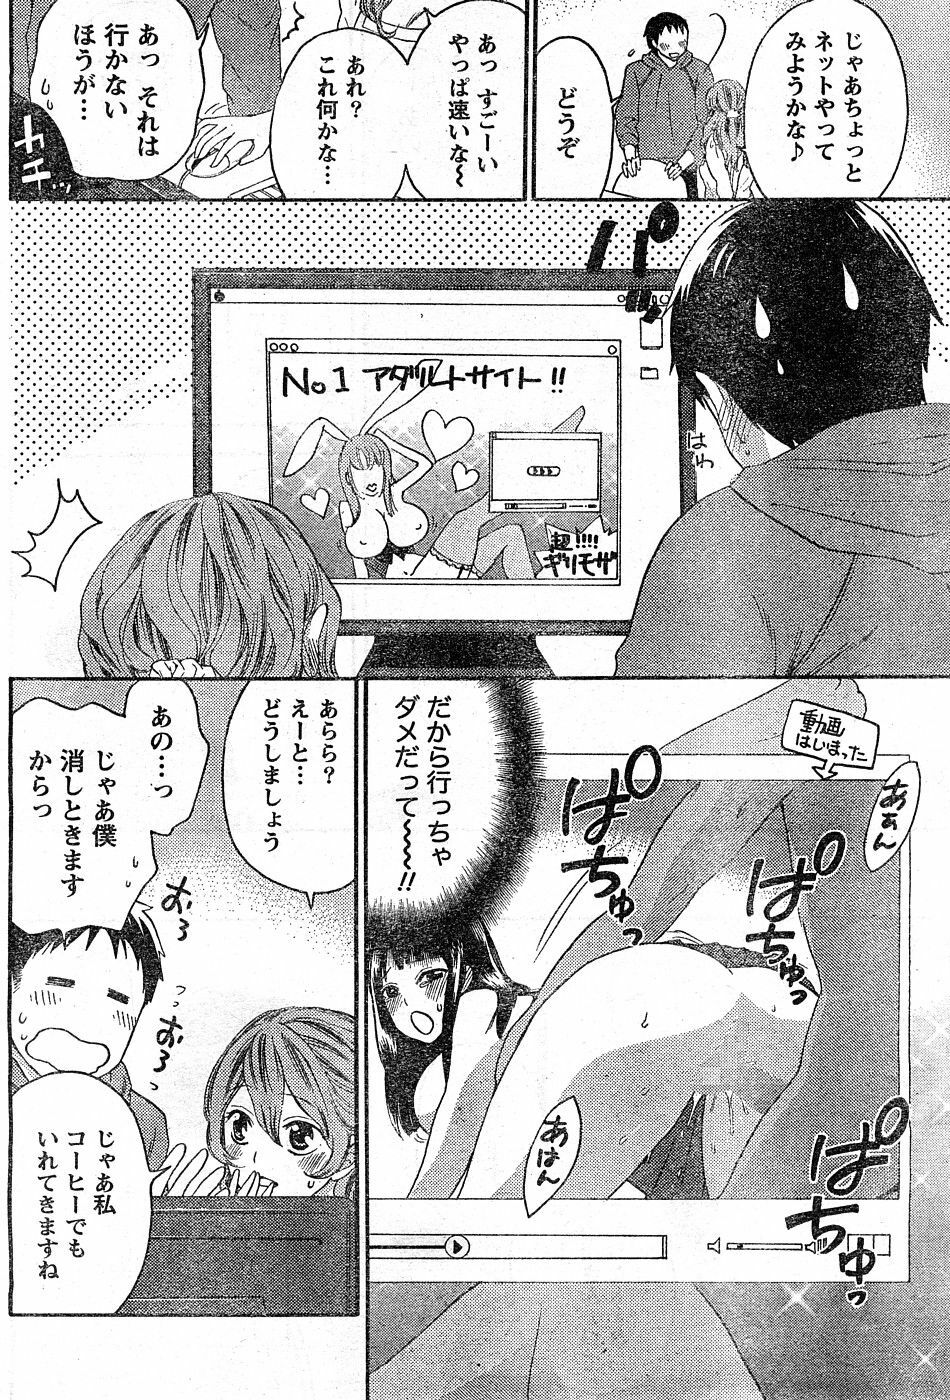 Monthly Vitaman 2009-02 [Incomplete] page 37 full